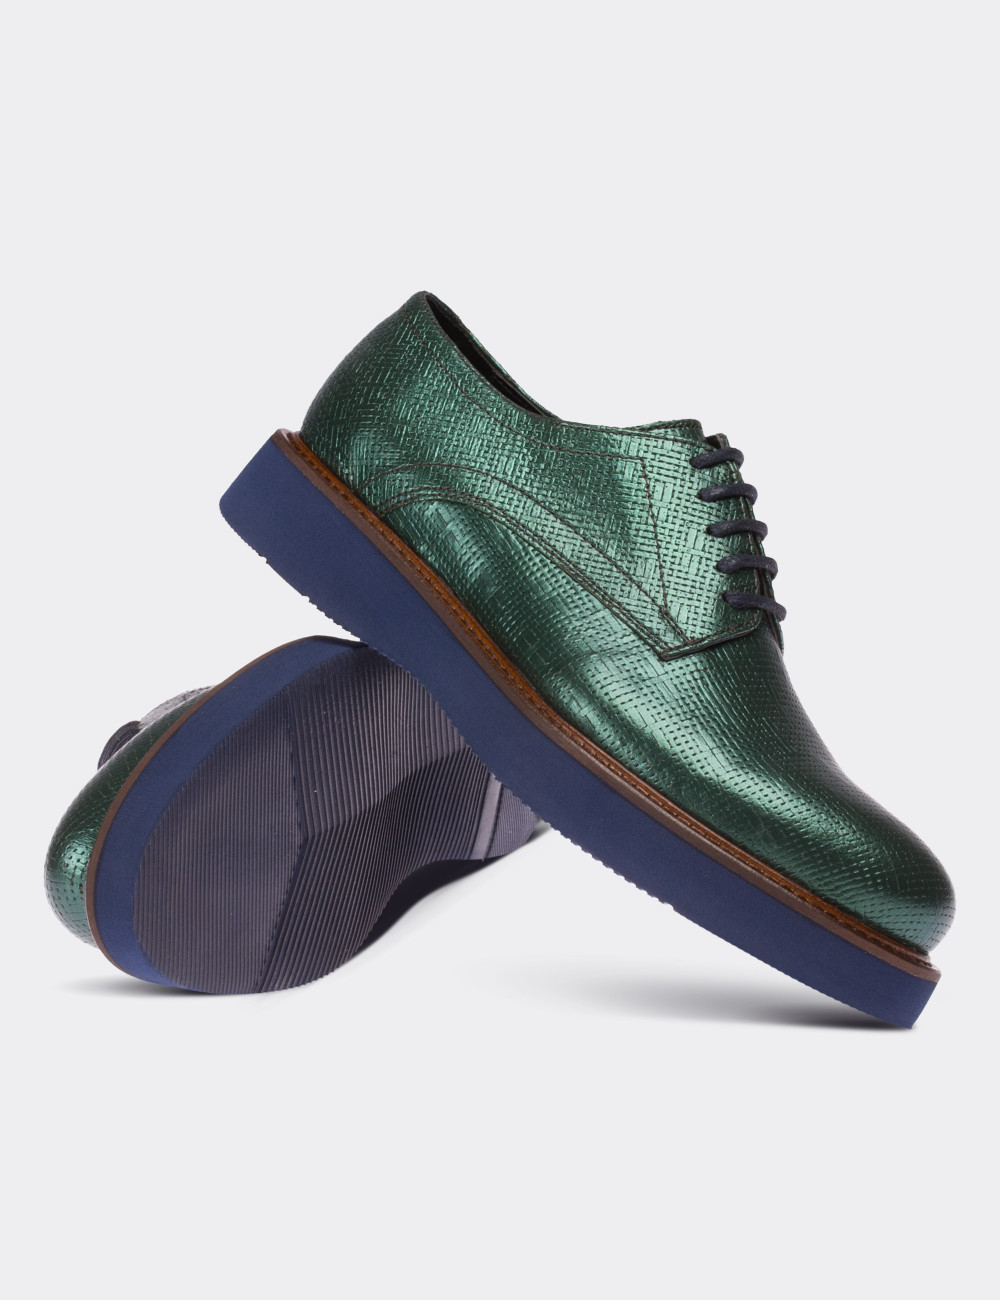 Green  Leather Lace-up Shoes - 01430ZYSLE07